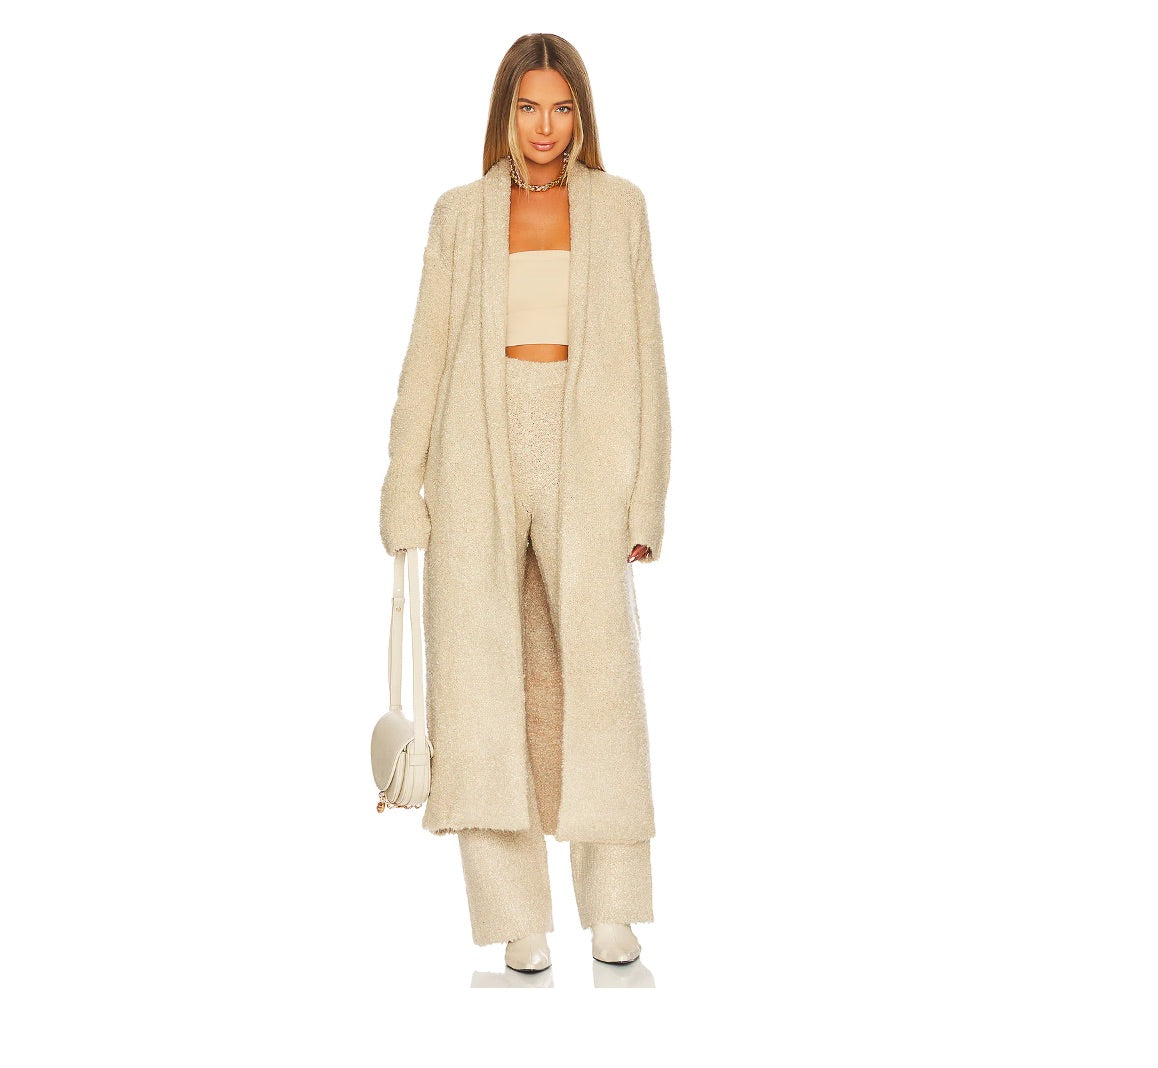 10 Cozy Maxi Dusters, Robes, and Kimonos to Fall in Love With